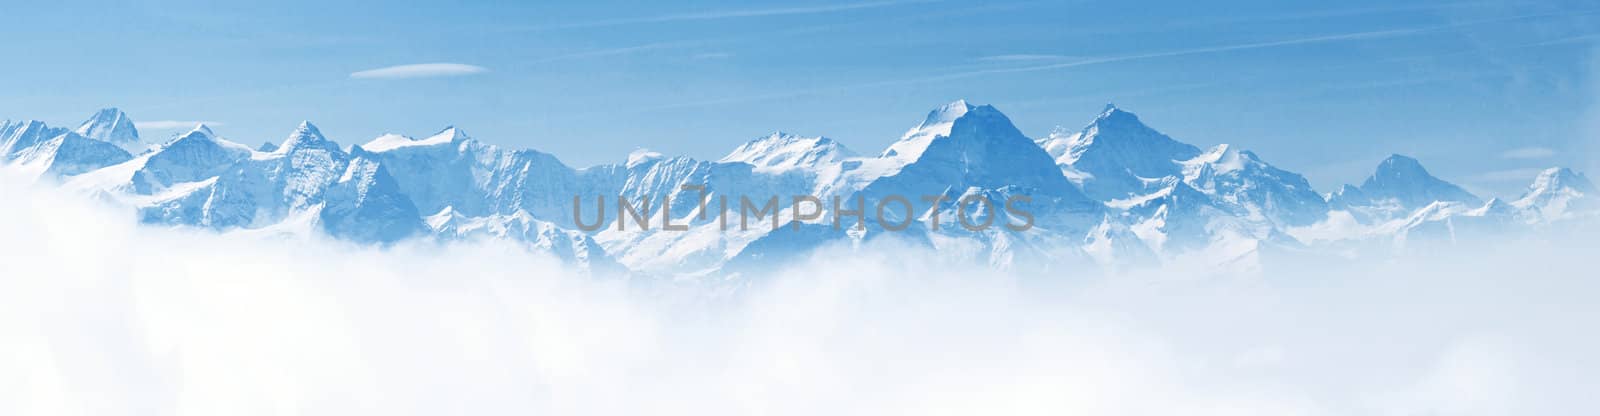 Panorama of Snow Mountain Landscape Alps by vichie81